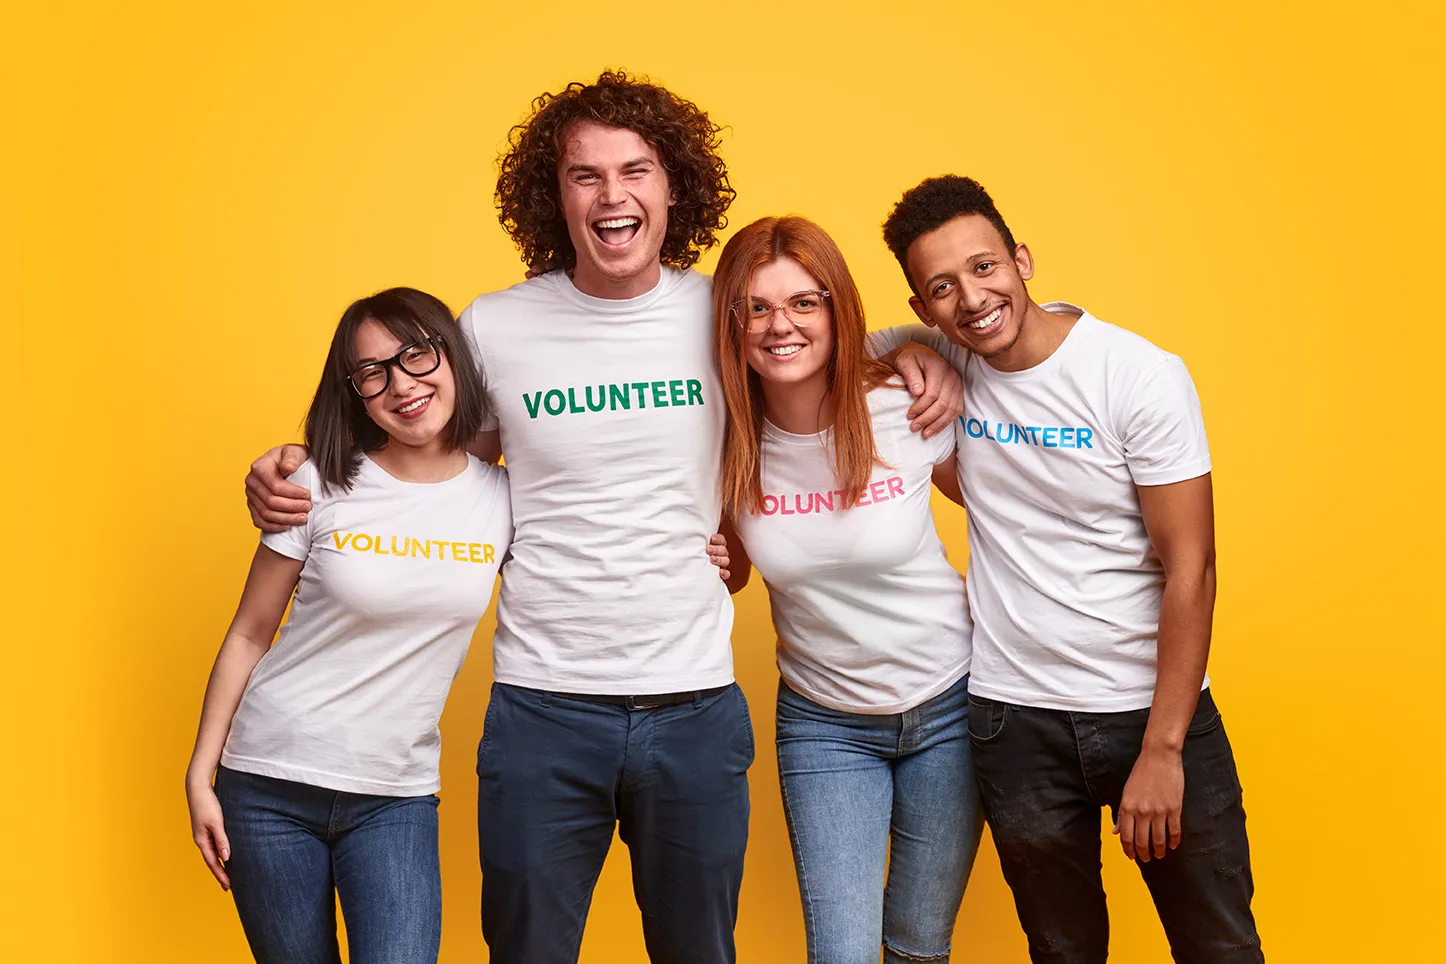 Four happy volunteers wearing white t-shirts with the word "volunteer" standing together against a yellow background.